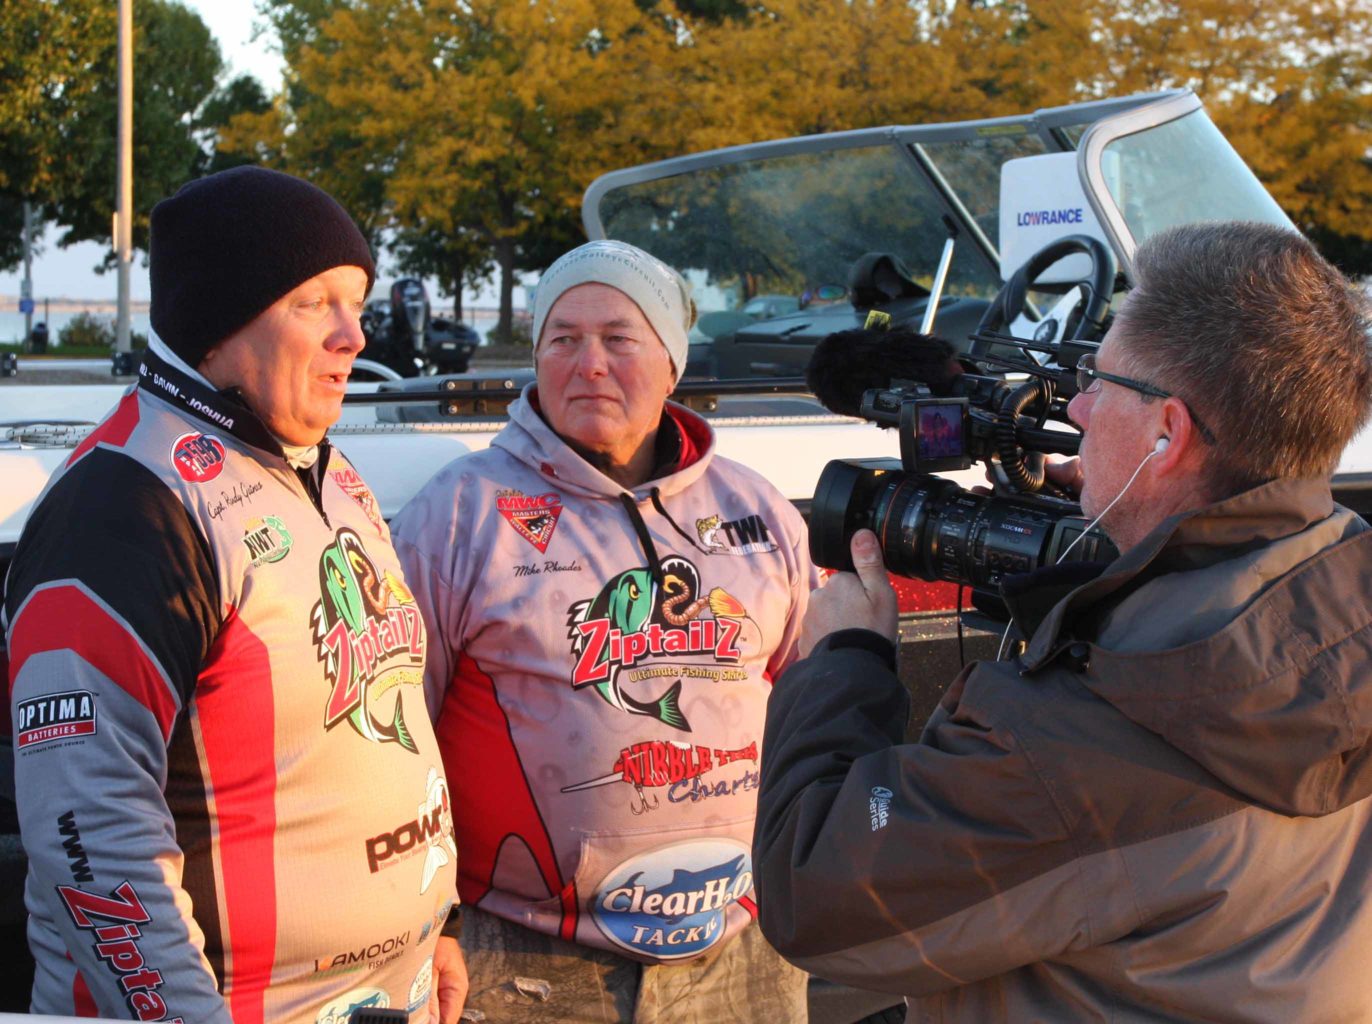 Leaders Randall Gaines and Mike Rhoades discuss day-three strategies in an interview for Federation Angler Television.